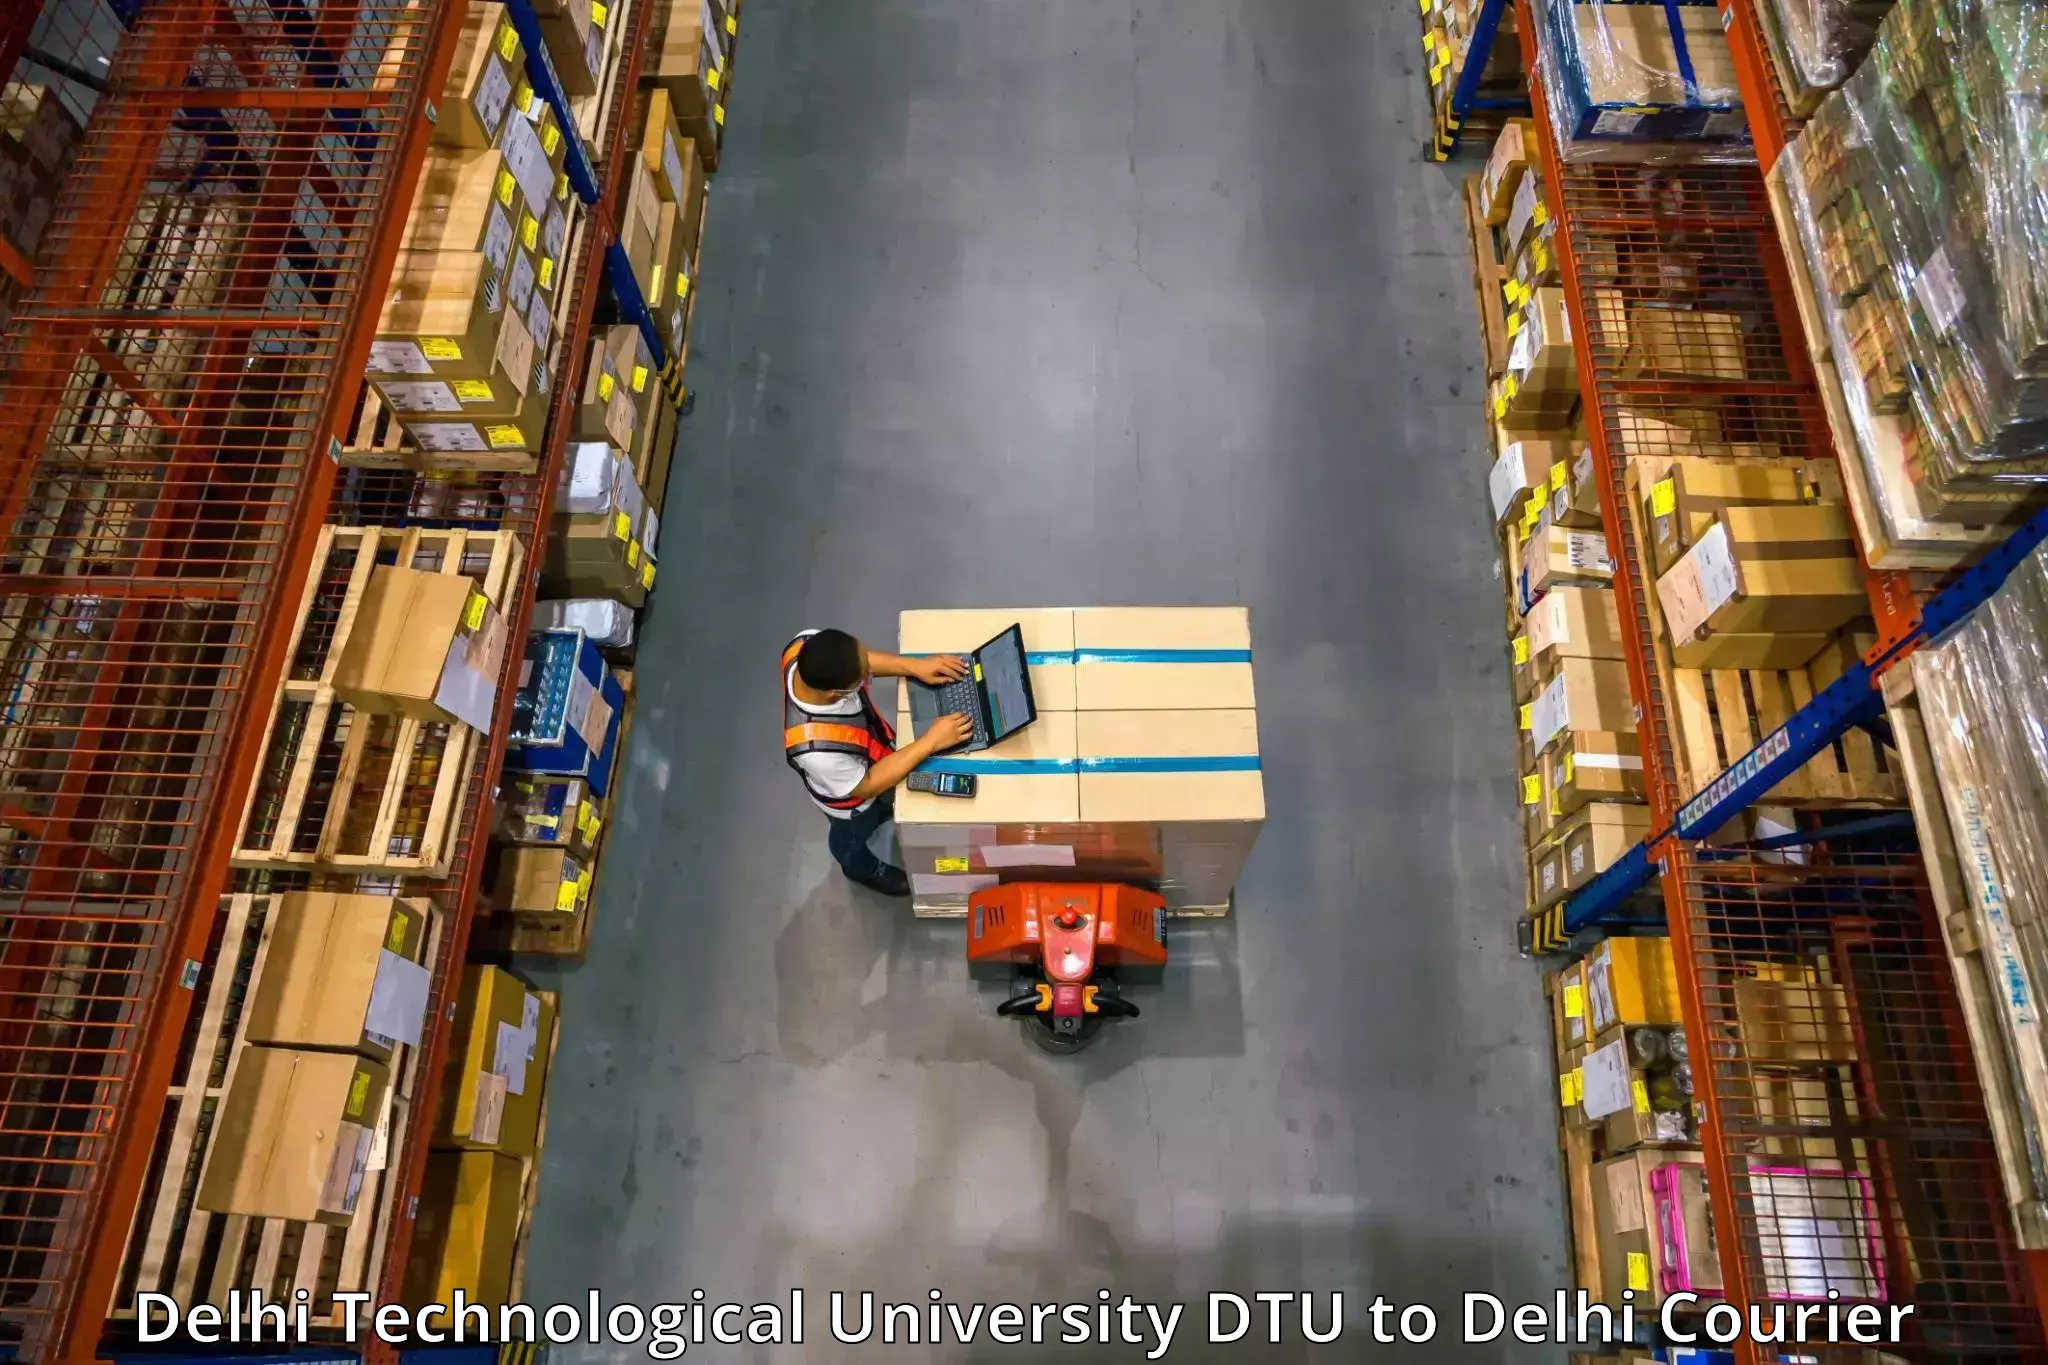 Expert packing and moving in Delhi Technological University DTU to IIT Delhi